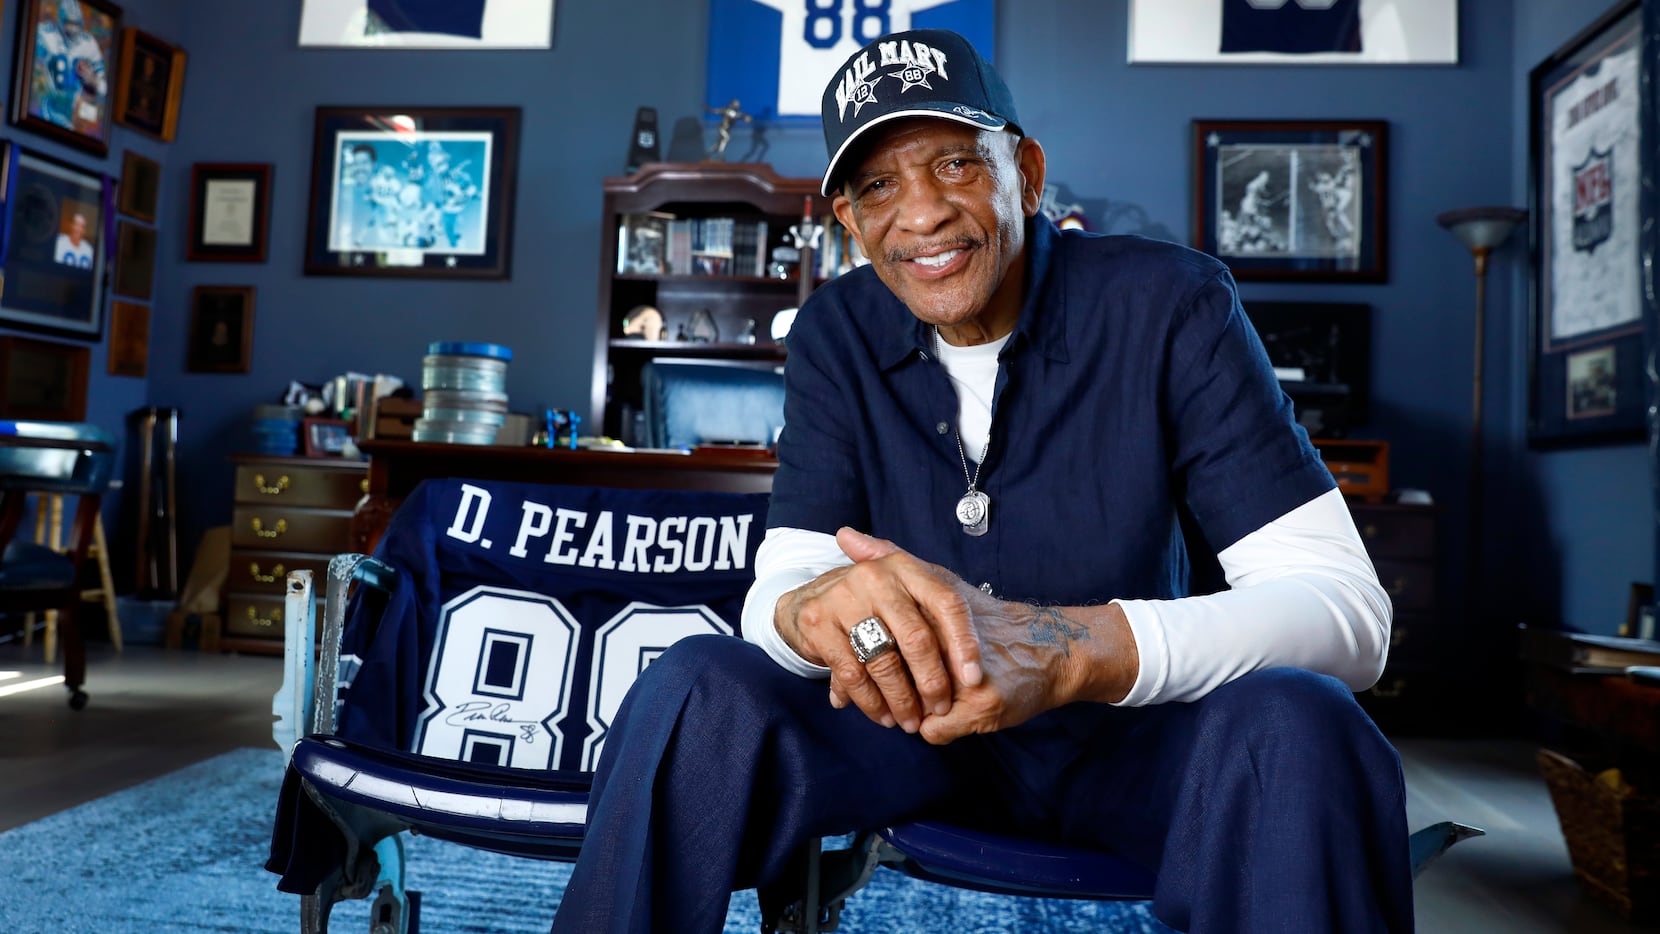 More often than not, Drew Pearson answered the Cowboys' prayers